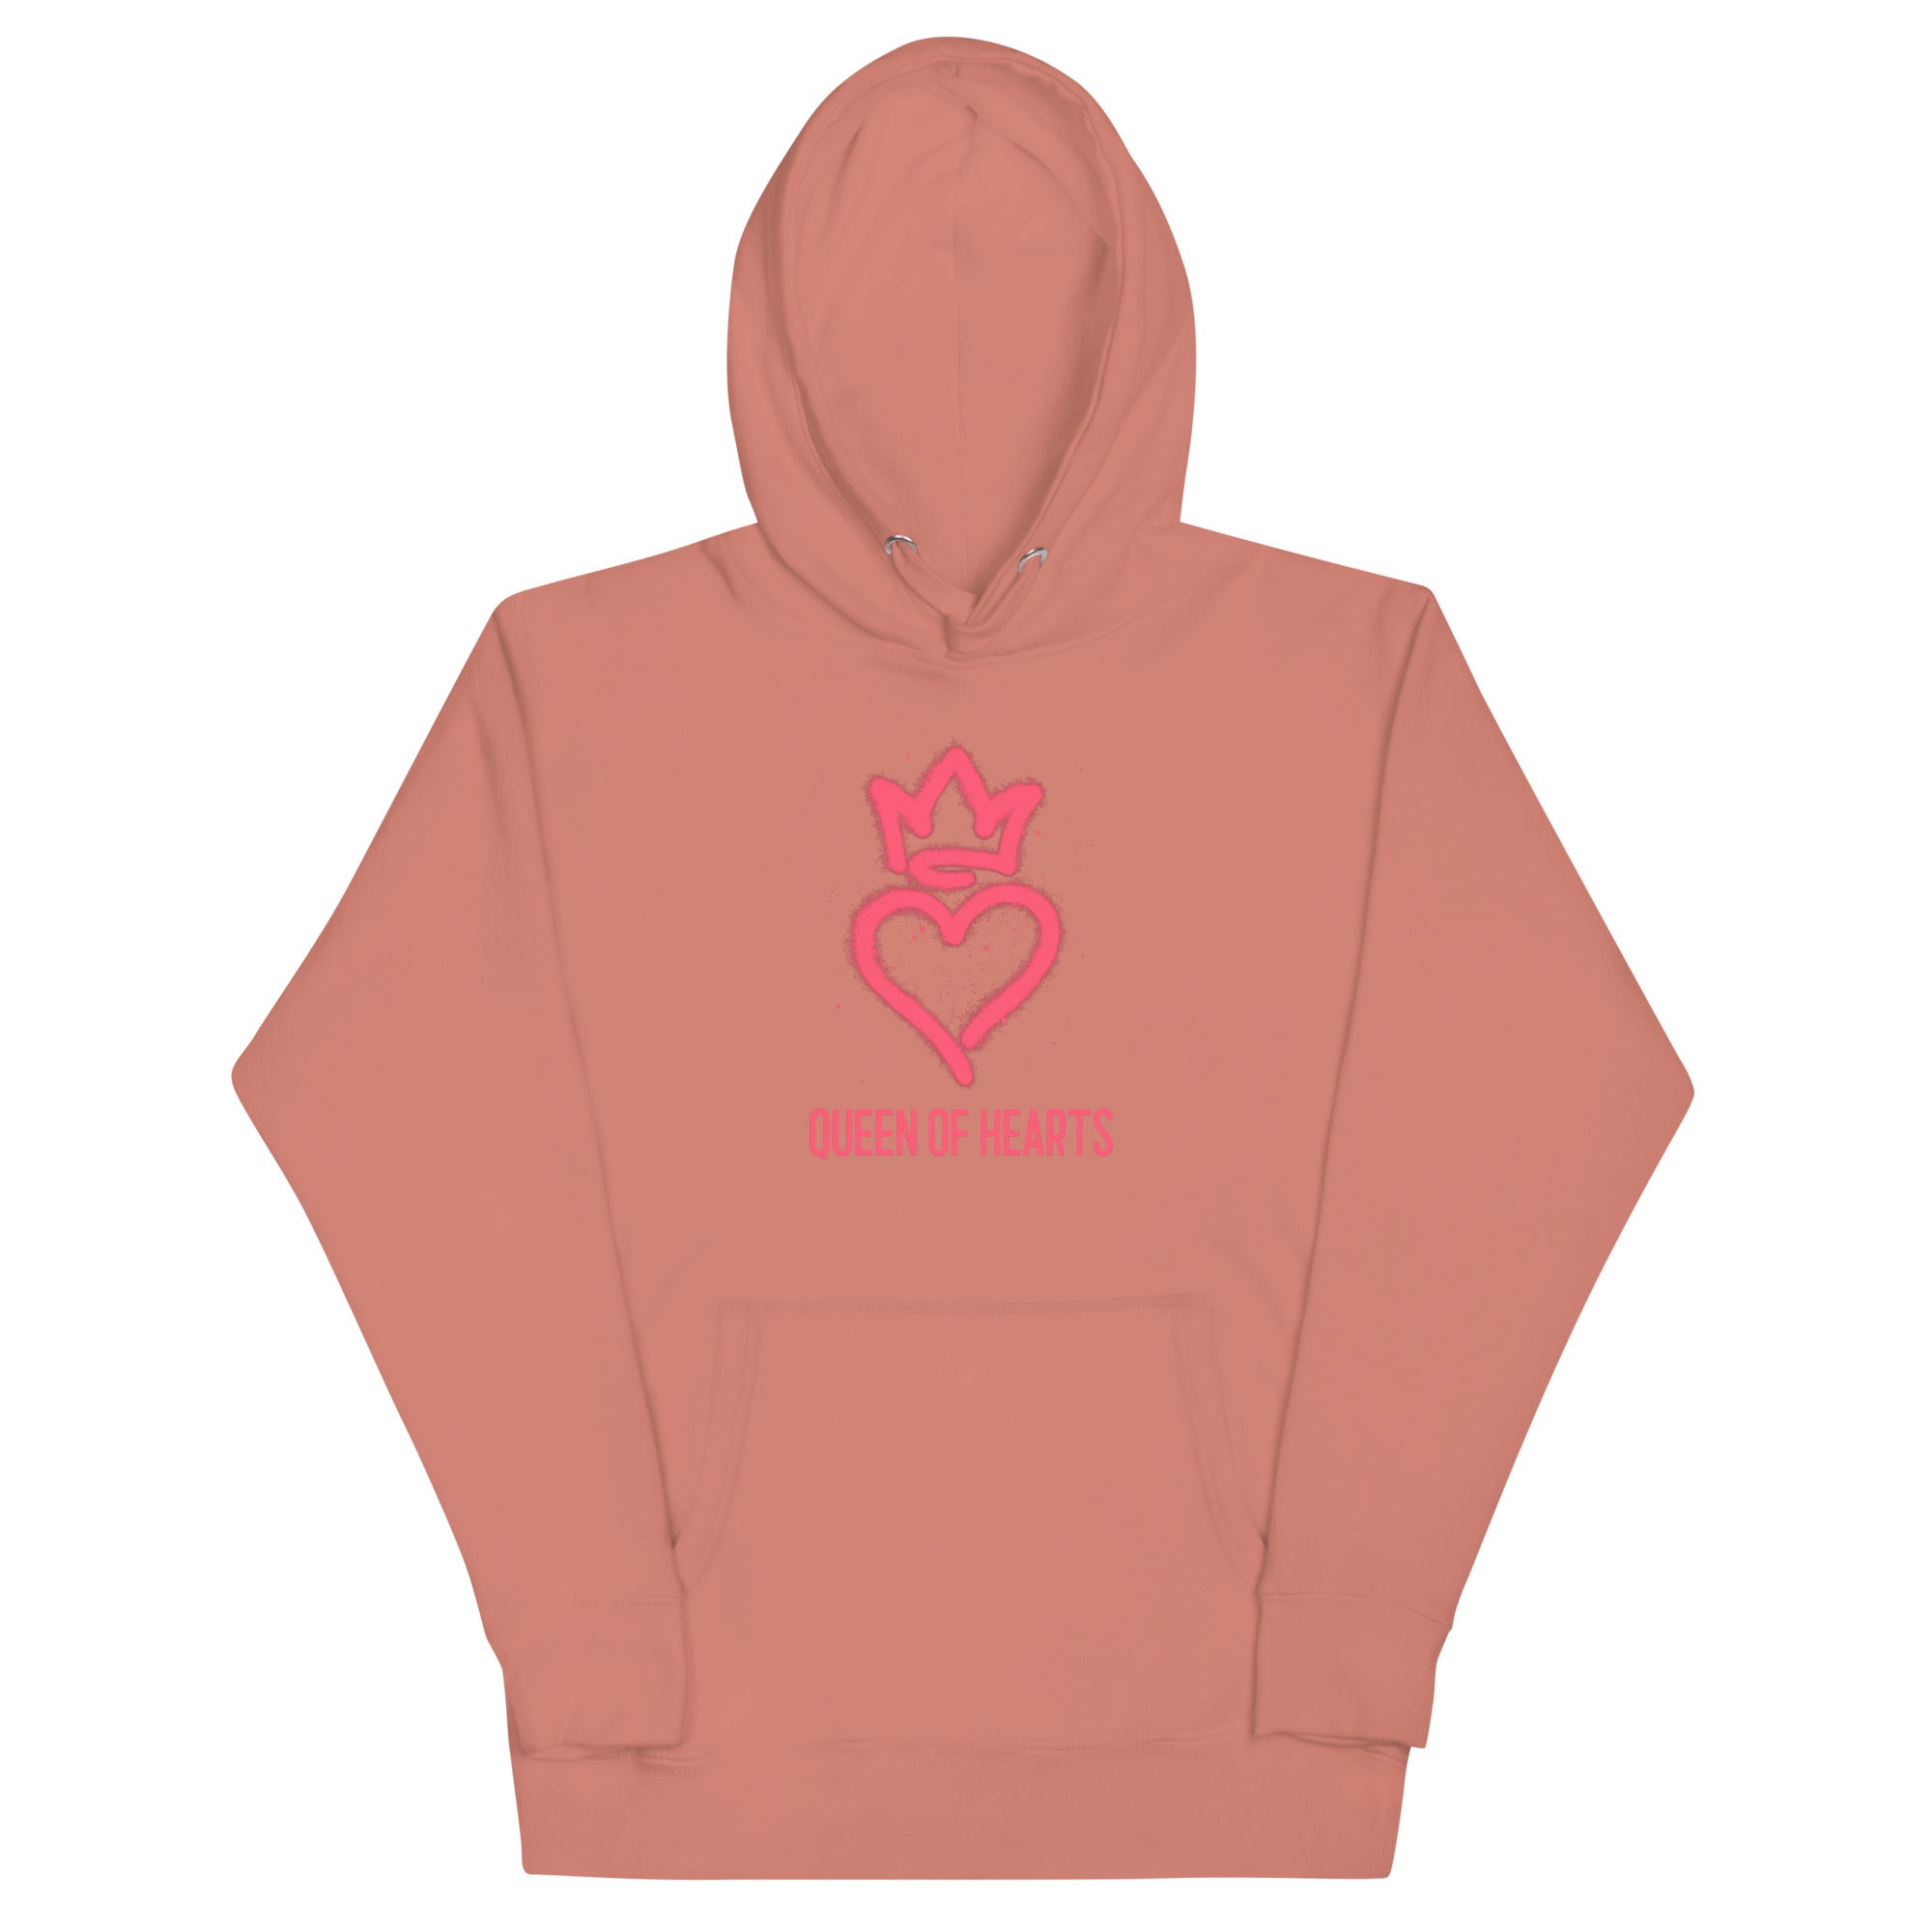 hoodie with a heart and a crown over it. the words queen of hearts is written under it. the color is dusty rose